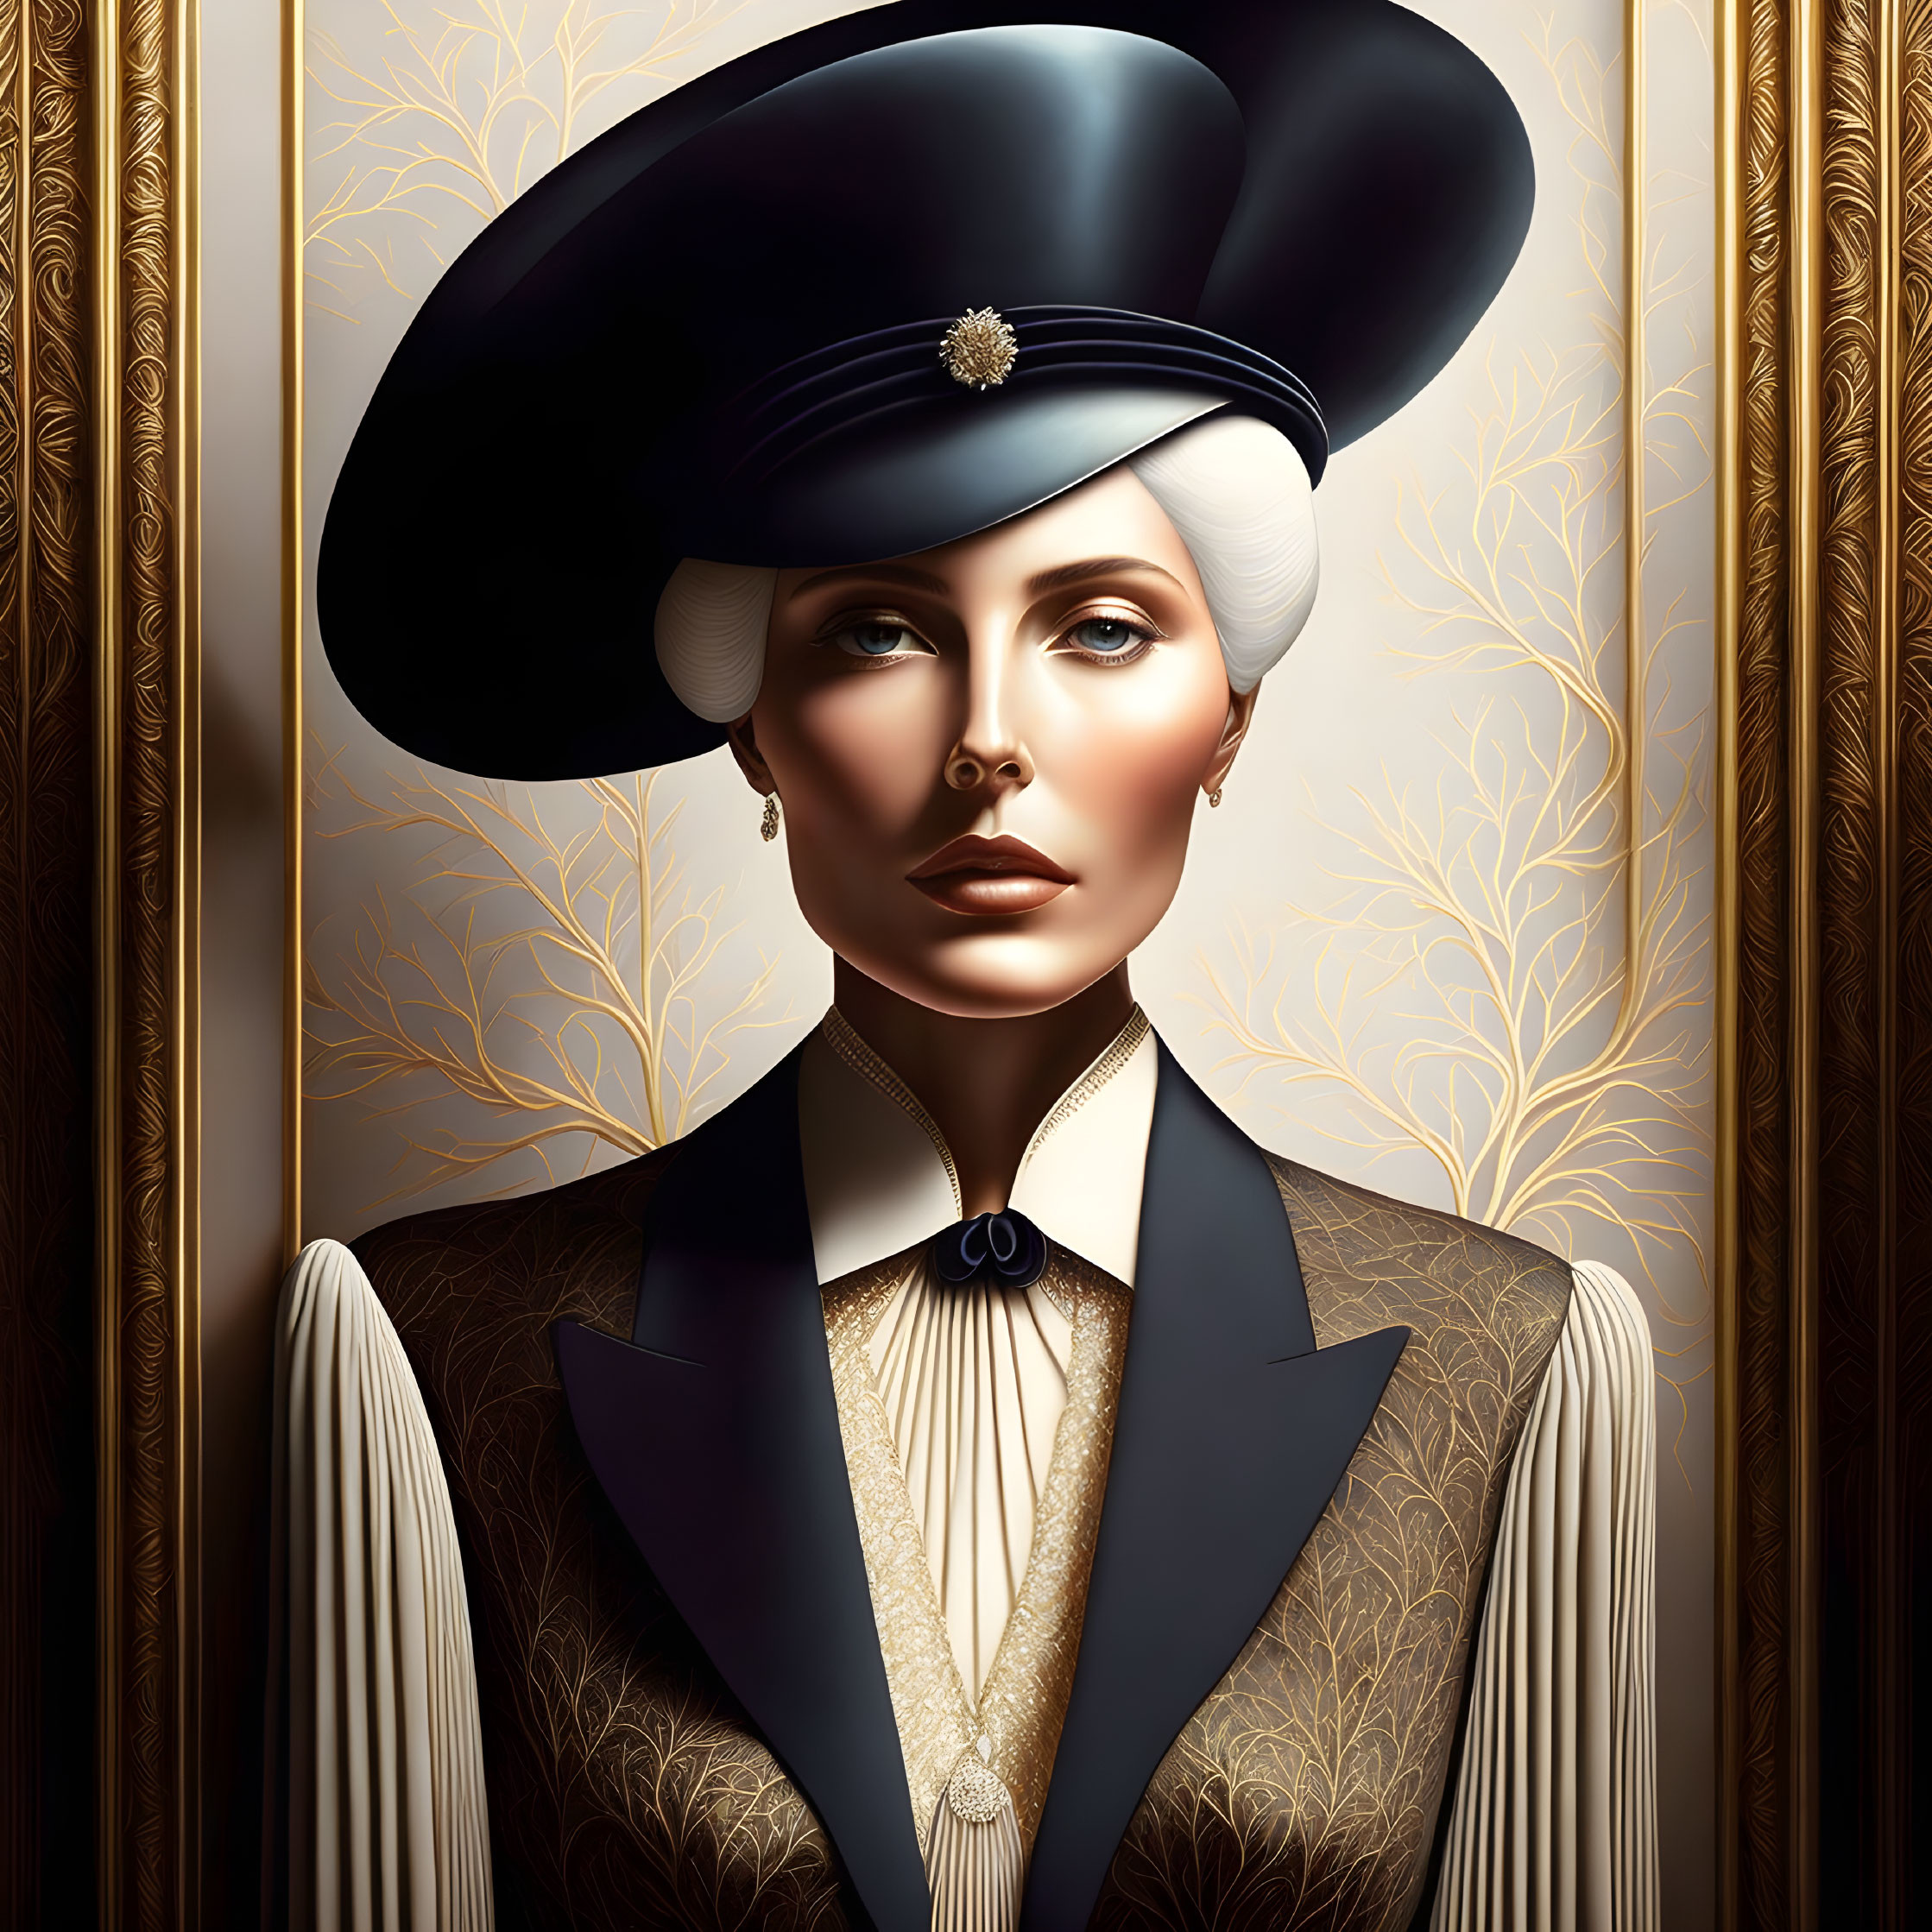 Illustrated portrait of woman in stylish hat and suit with ornate golden background